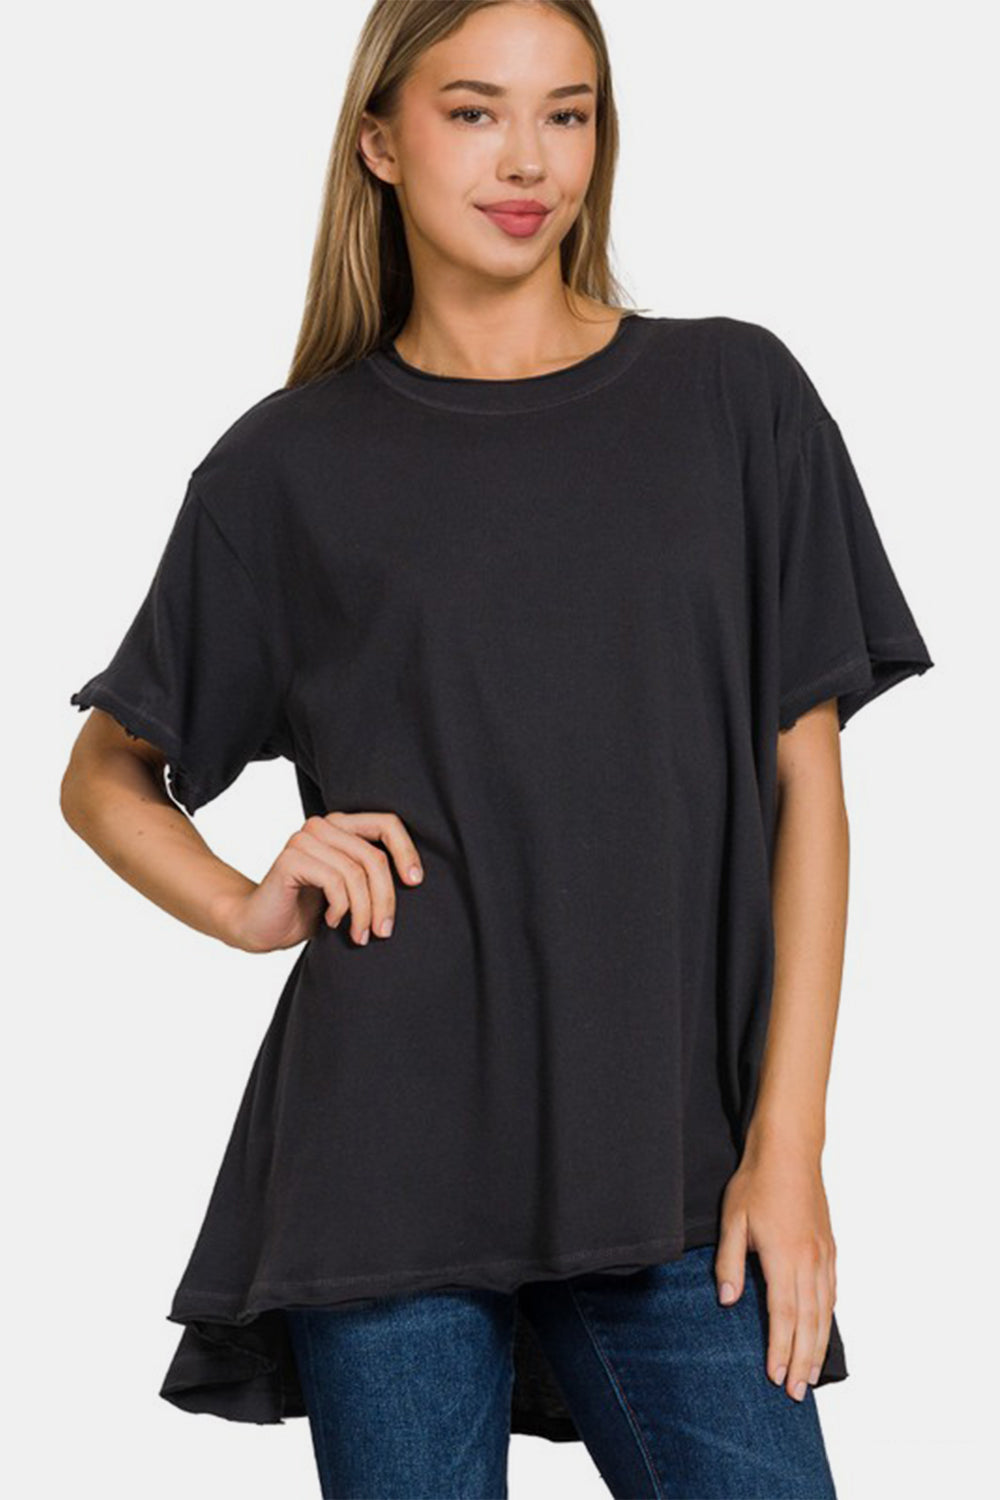 Zenana Round Neck Short Sleeve T-Shirt-100 Short Sleeve Tops-Inspired by Justeen-Women's Clothing Boutique in Chicago, Illinois